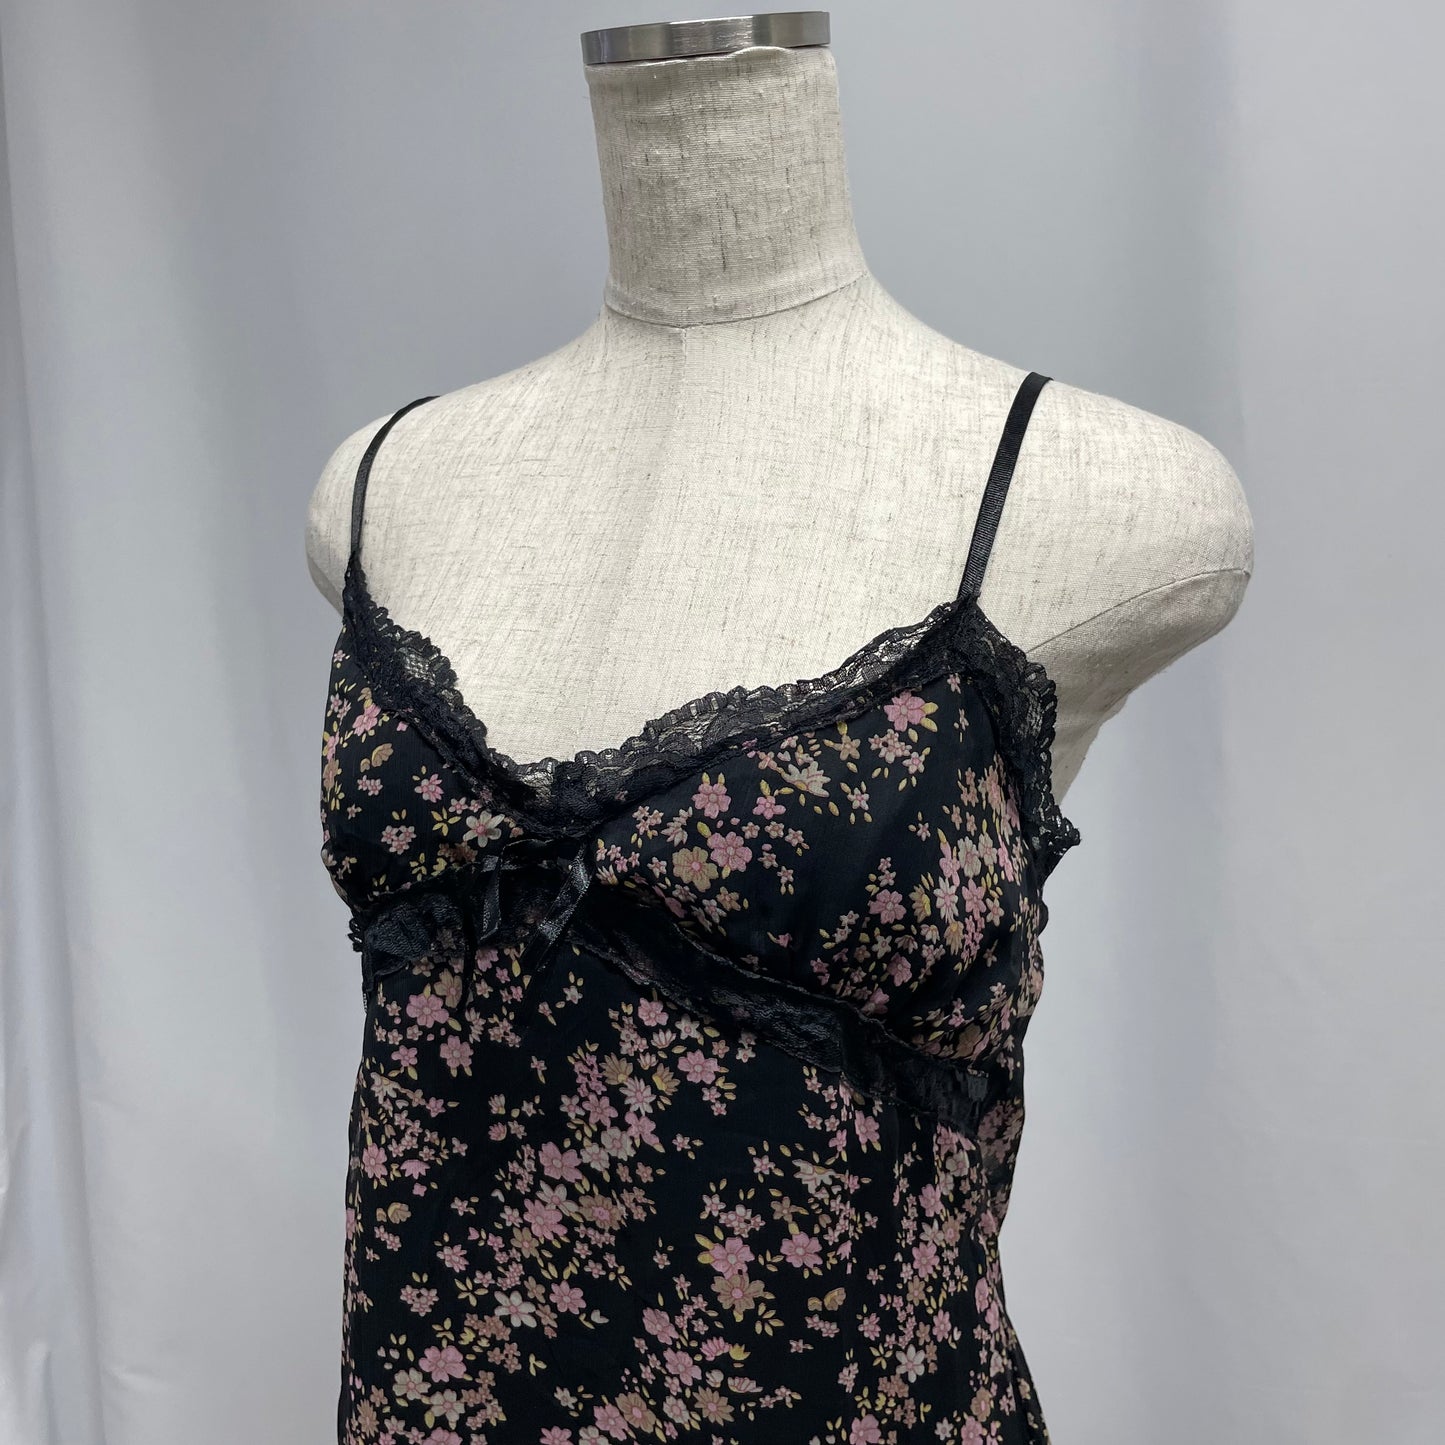 00's "Rose Passion" flower lingerie cami one-piece